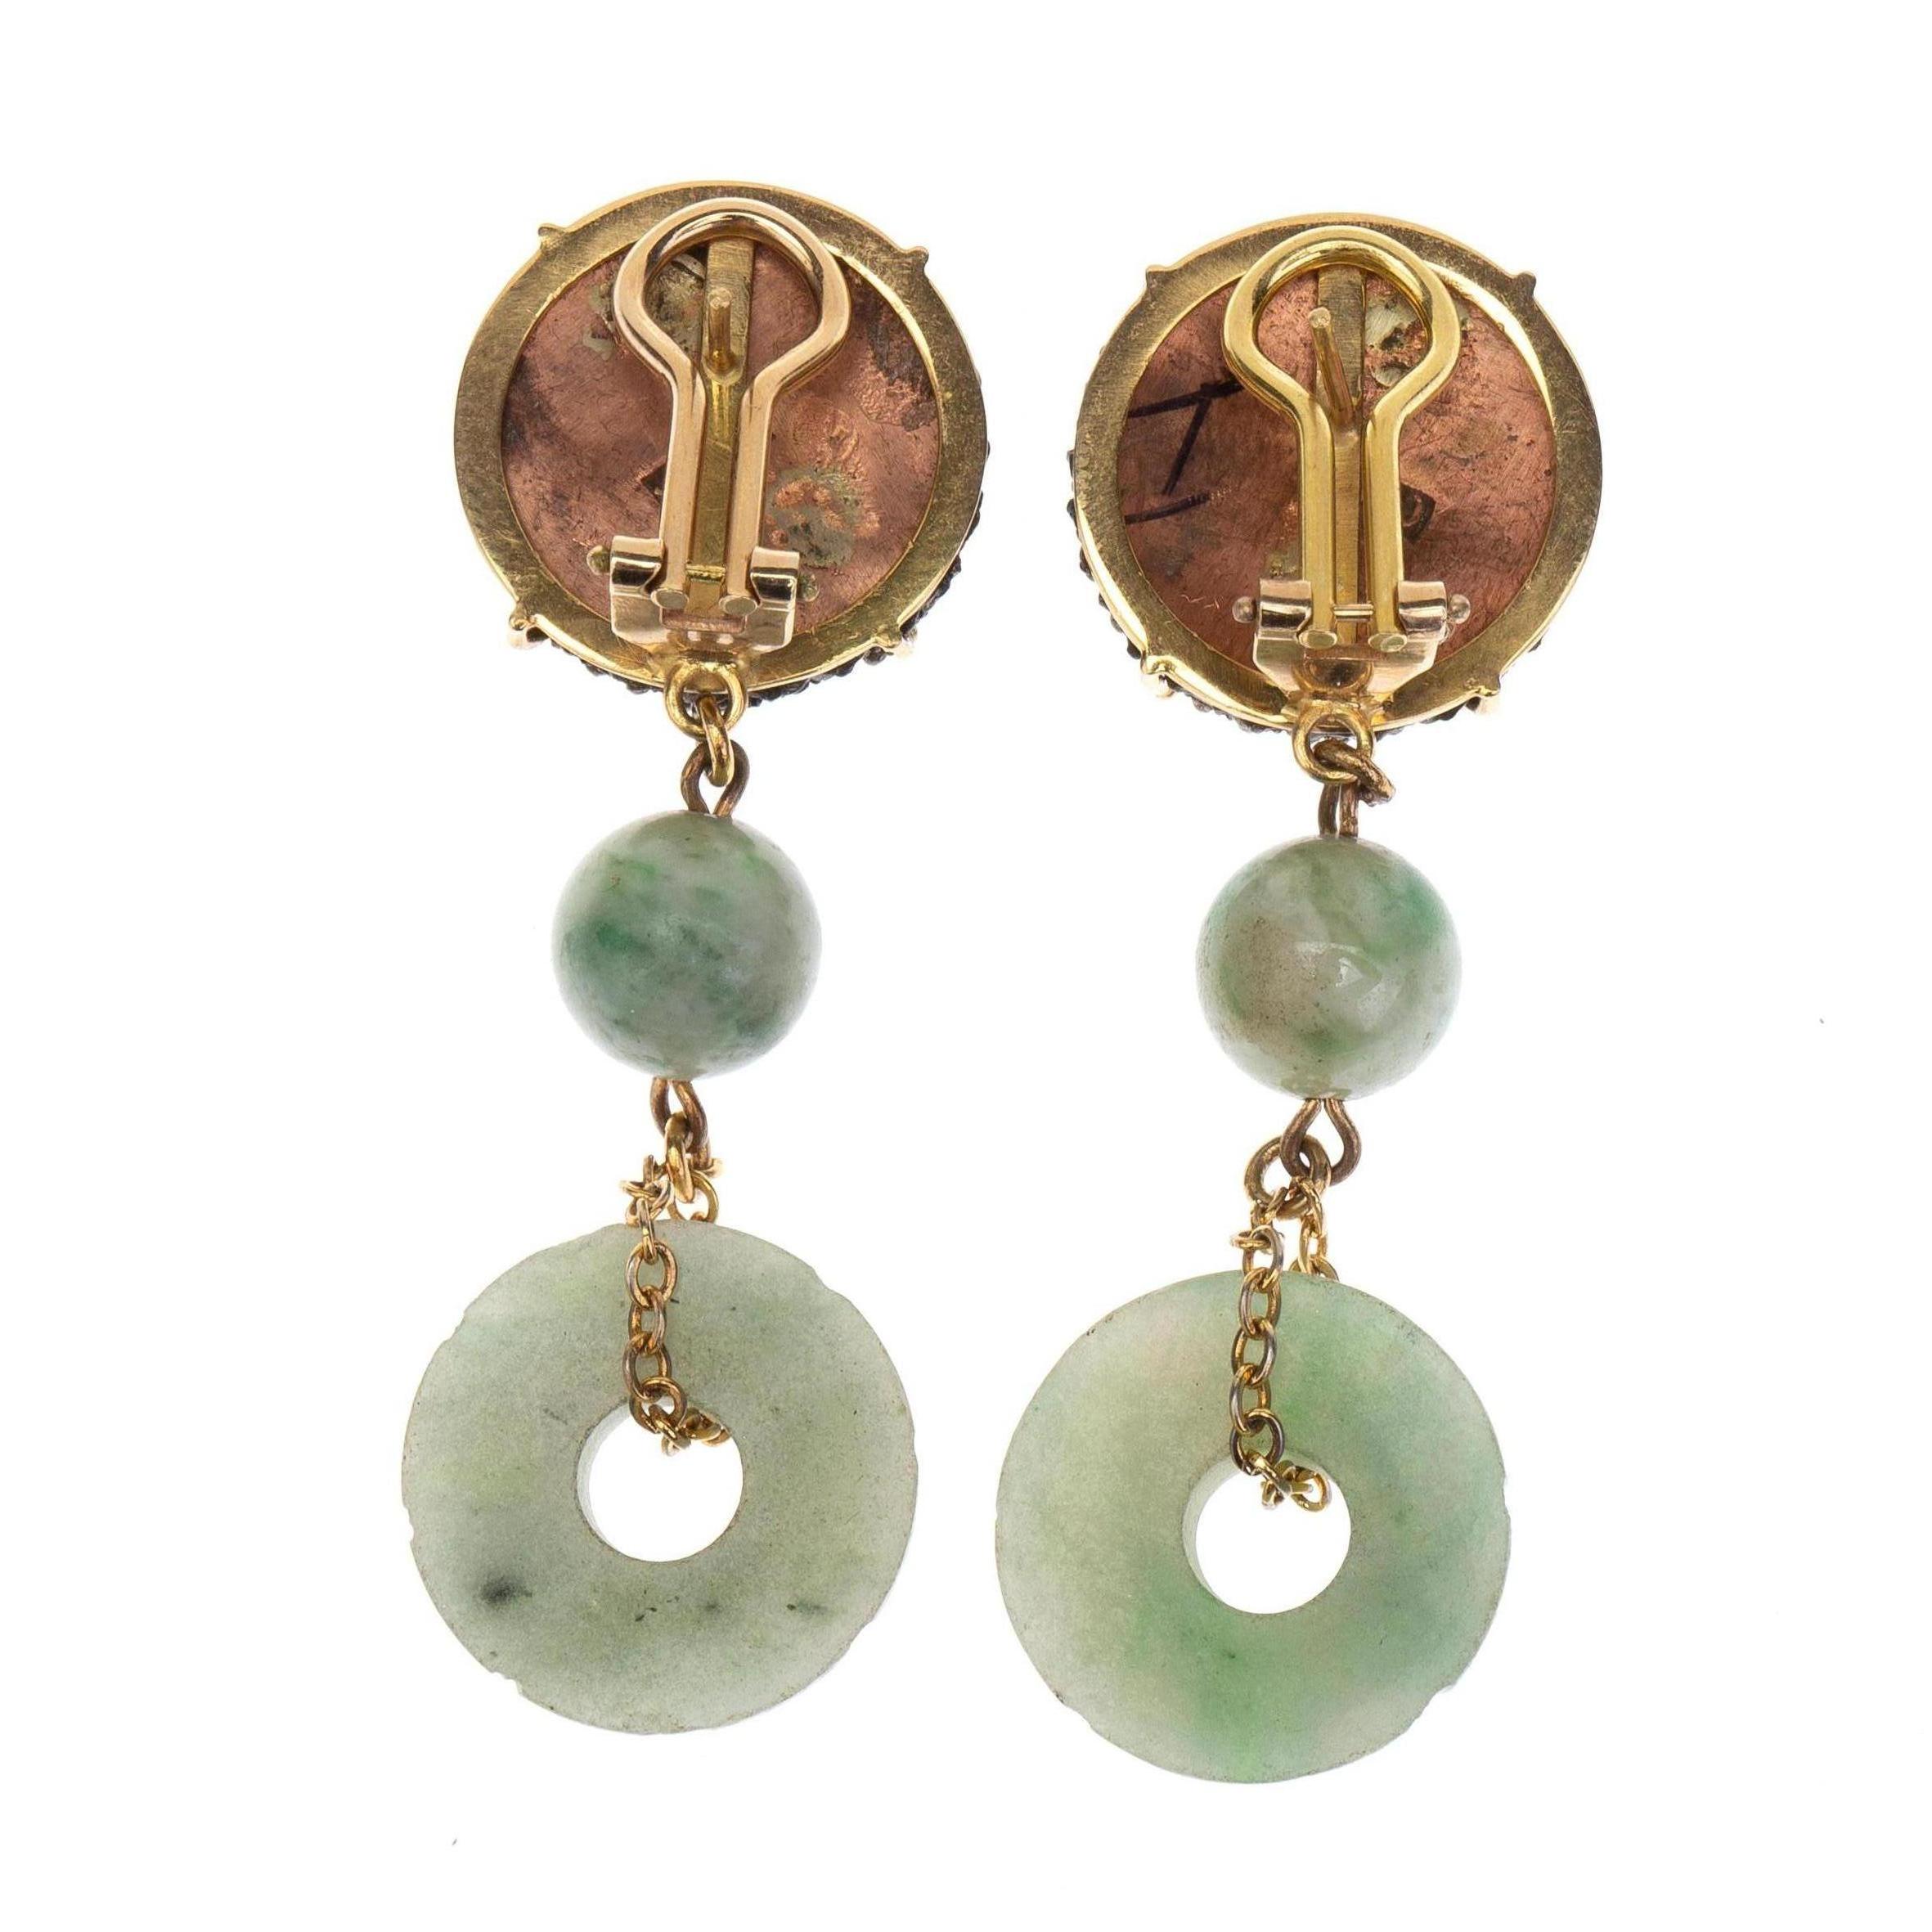 Antique Laquer antiques  carved Jade, 18 k  Gold gr 8,20 Earrings.
All Giulia Colussi jewelry is new and has never been previously owned or worn. Each item will arrive at your door beautifully gift wrapped in our boxes, put inside an elegant pouch